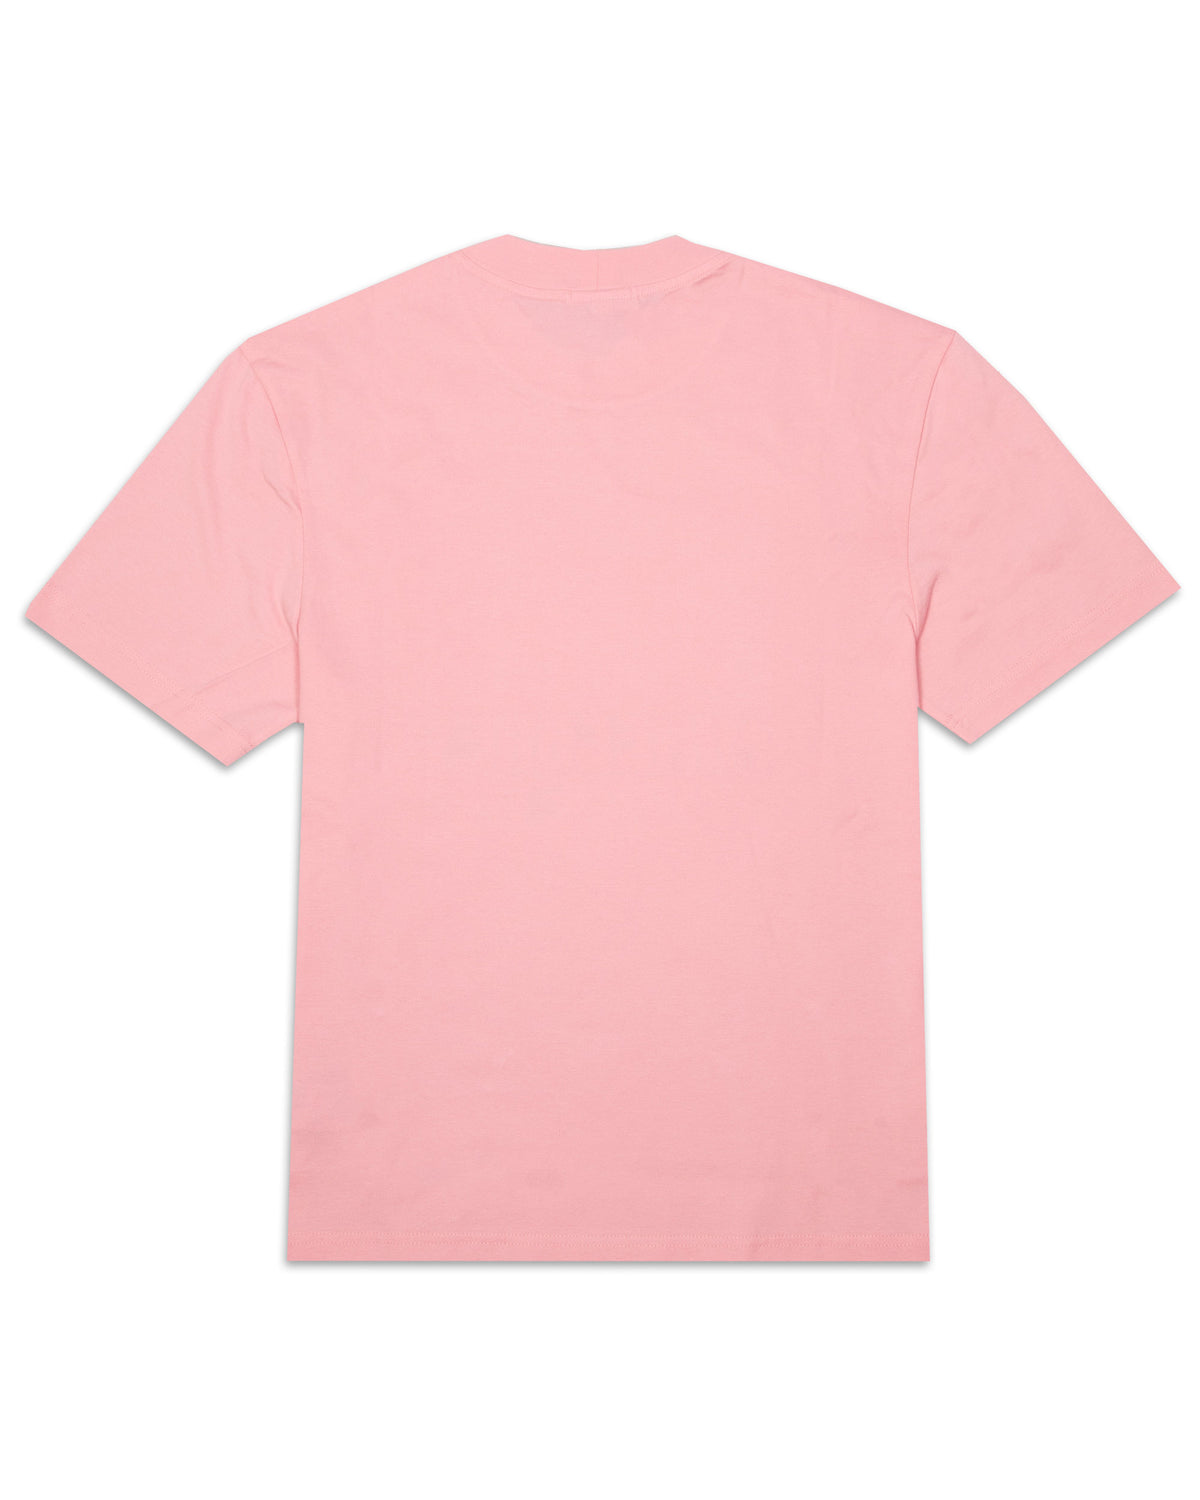 Lacoste x Minecraft T-Shirt Pink TH5038-7SY